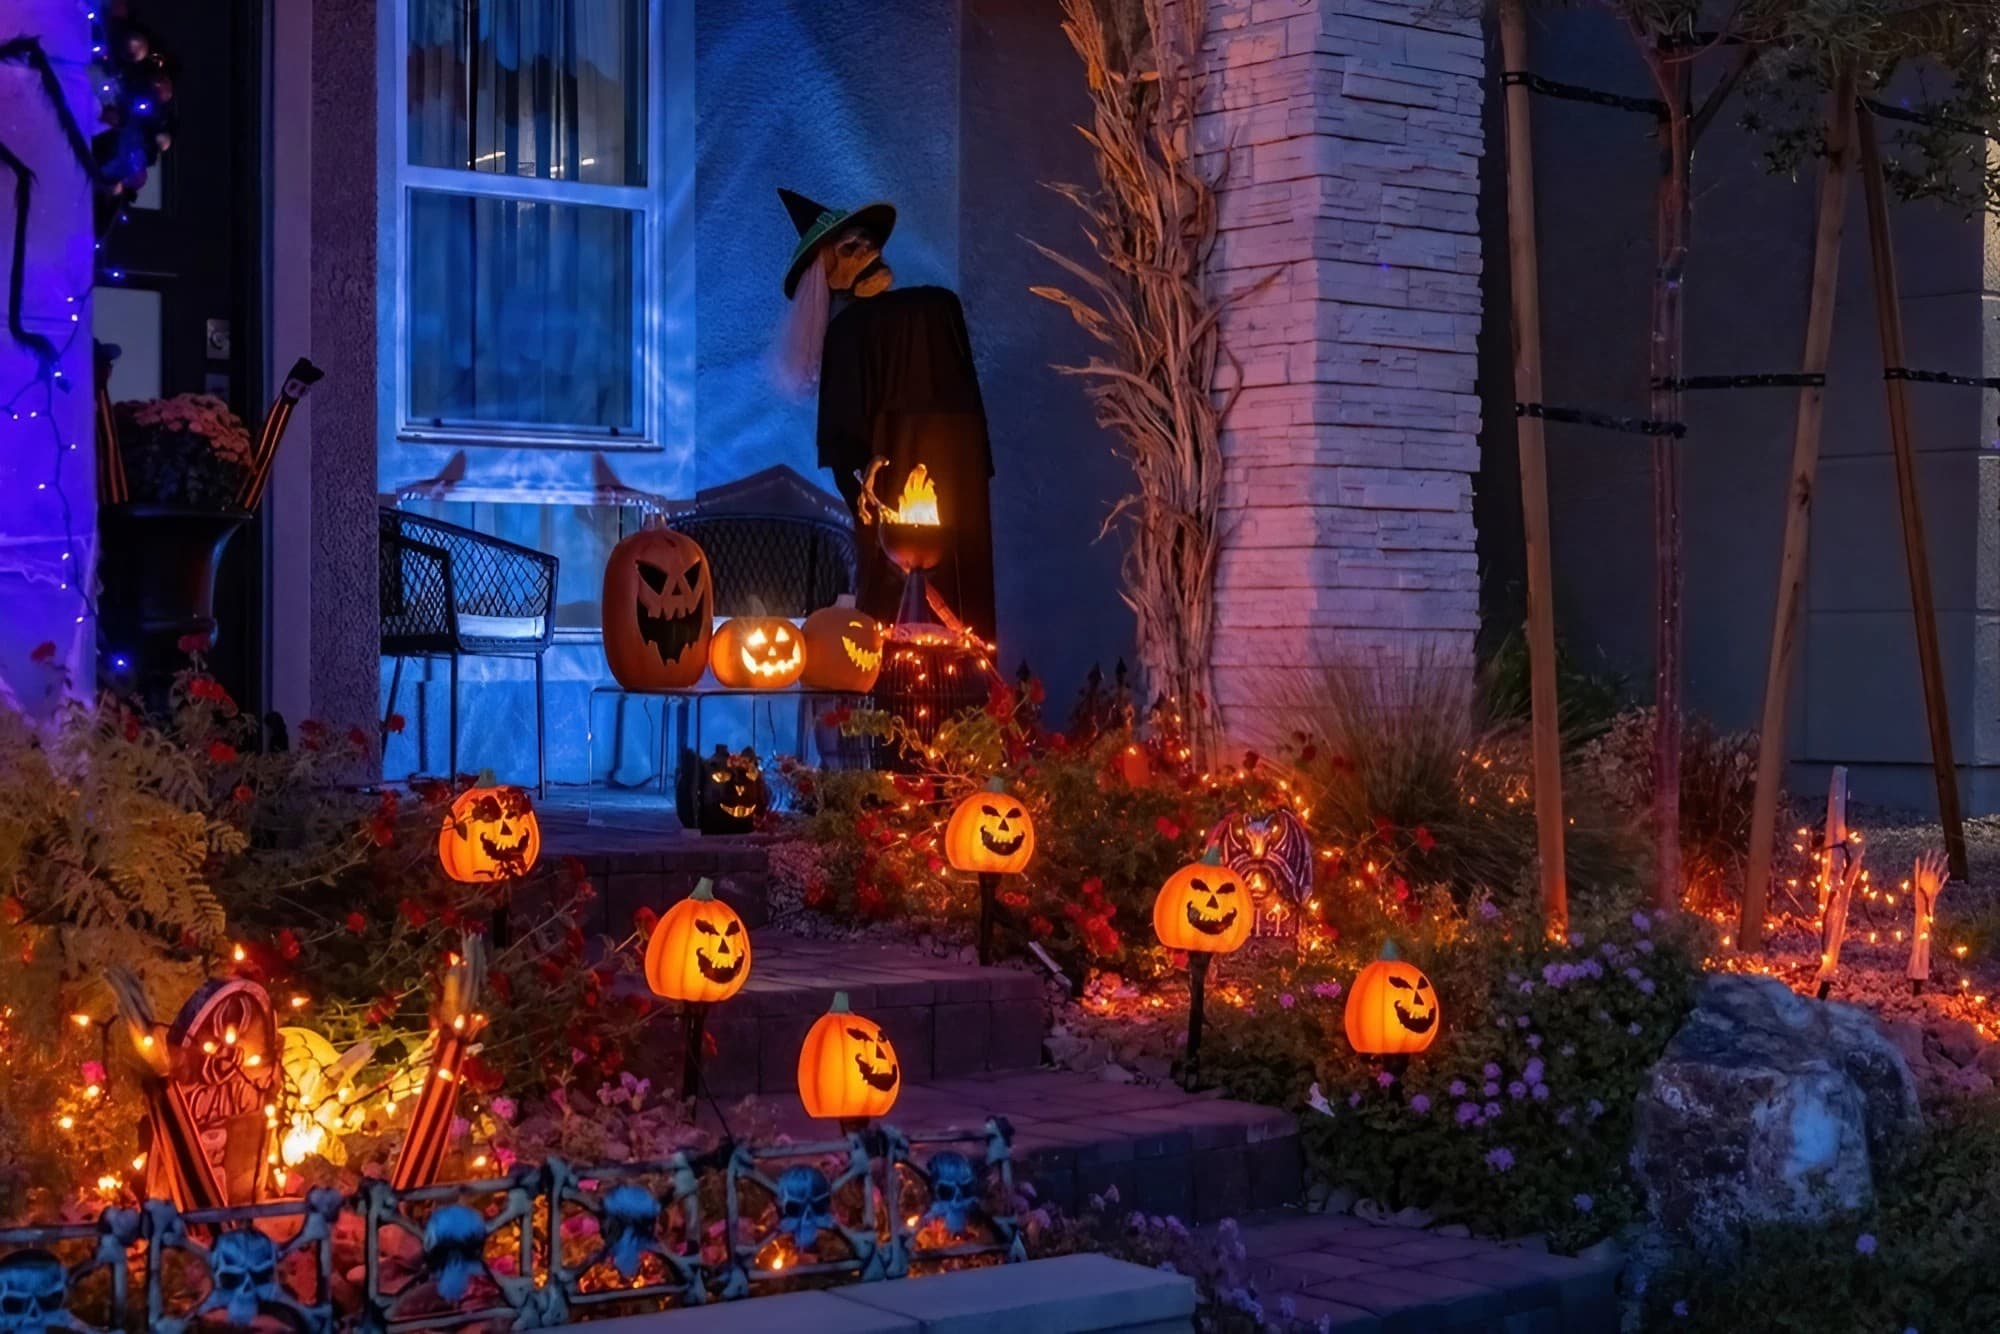 2023 Best Halloween Decorations to Transform Your Home & Yard - The Best Halloween Decorations to Transform Your Home and Front Yard